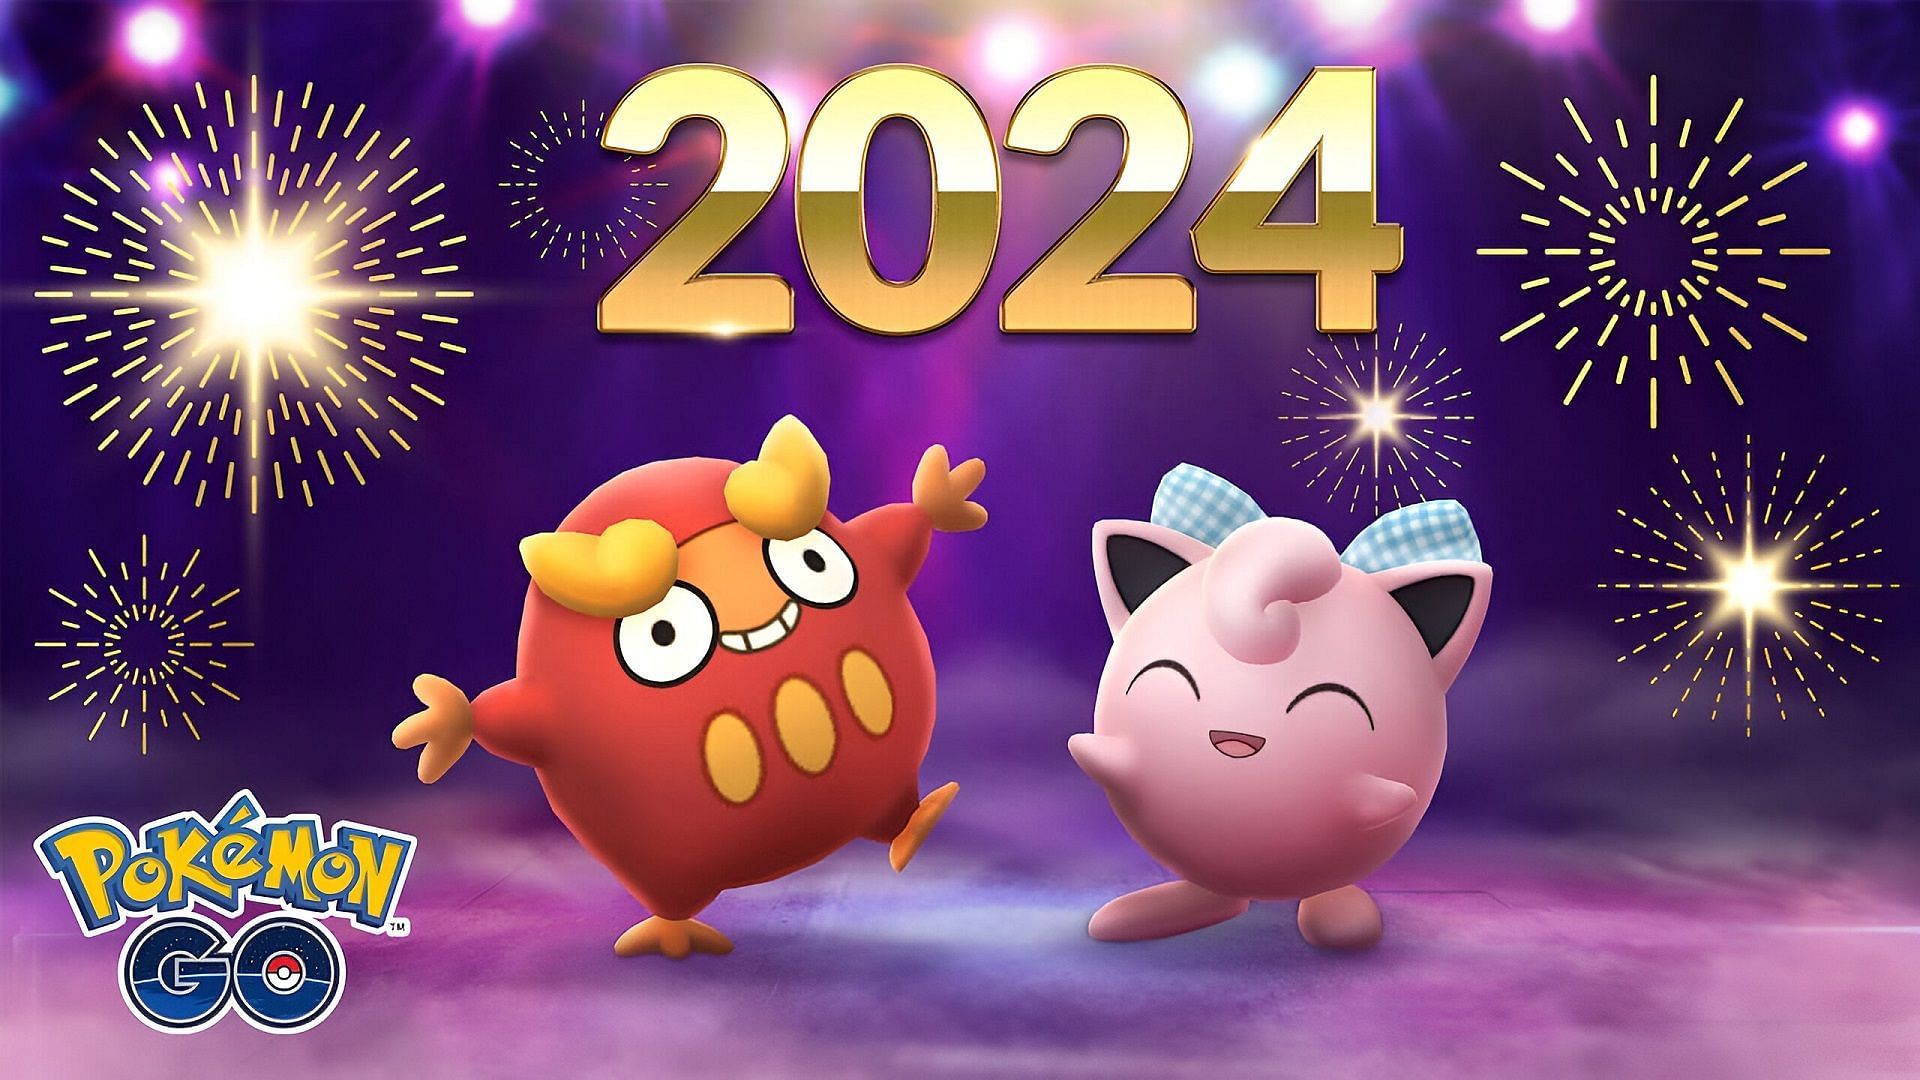 Pokemon GO players hoping to get Ribbon Jigglypuff/Wigglytuff will need to play the New Year&#039;s 2024 event (Image via Niantic)